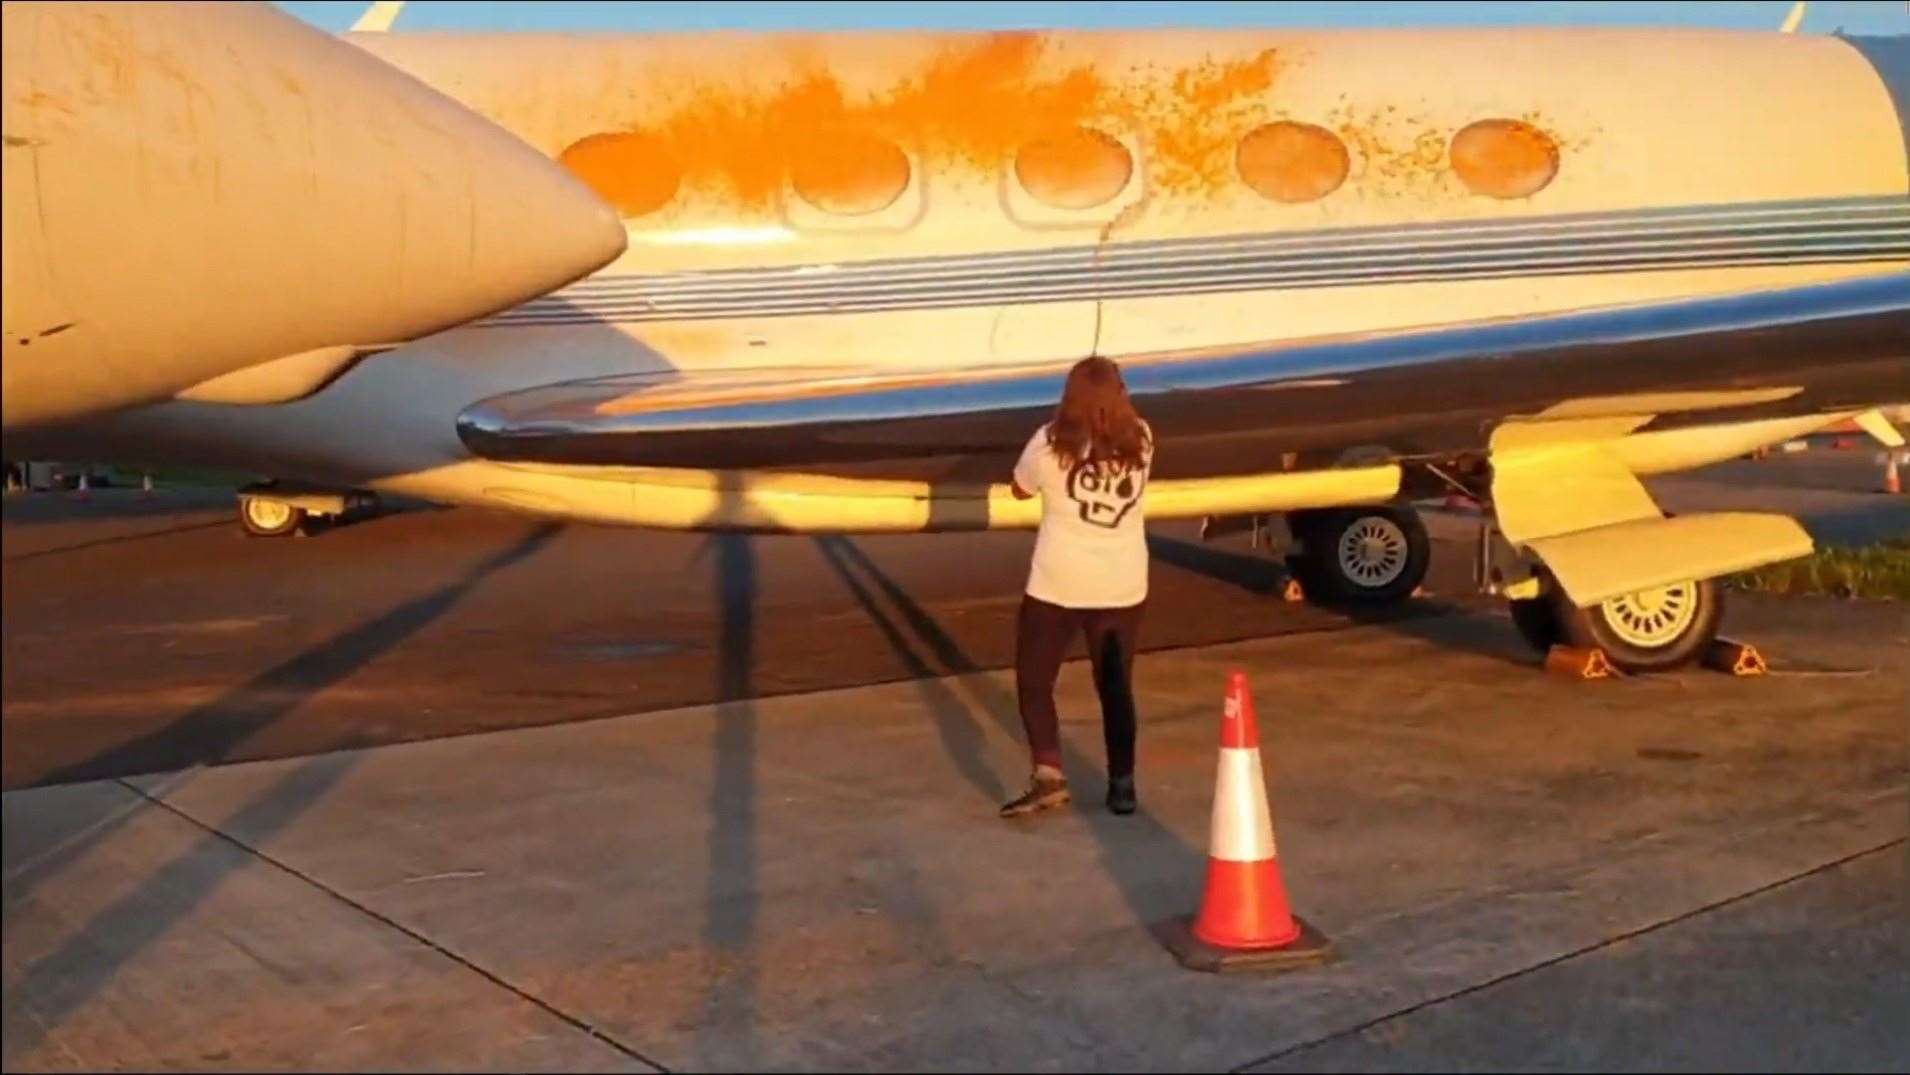 An activist spraying the fuselage and windows of a plane (Just Stop Oil/PA)